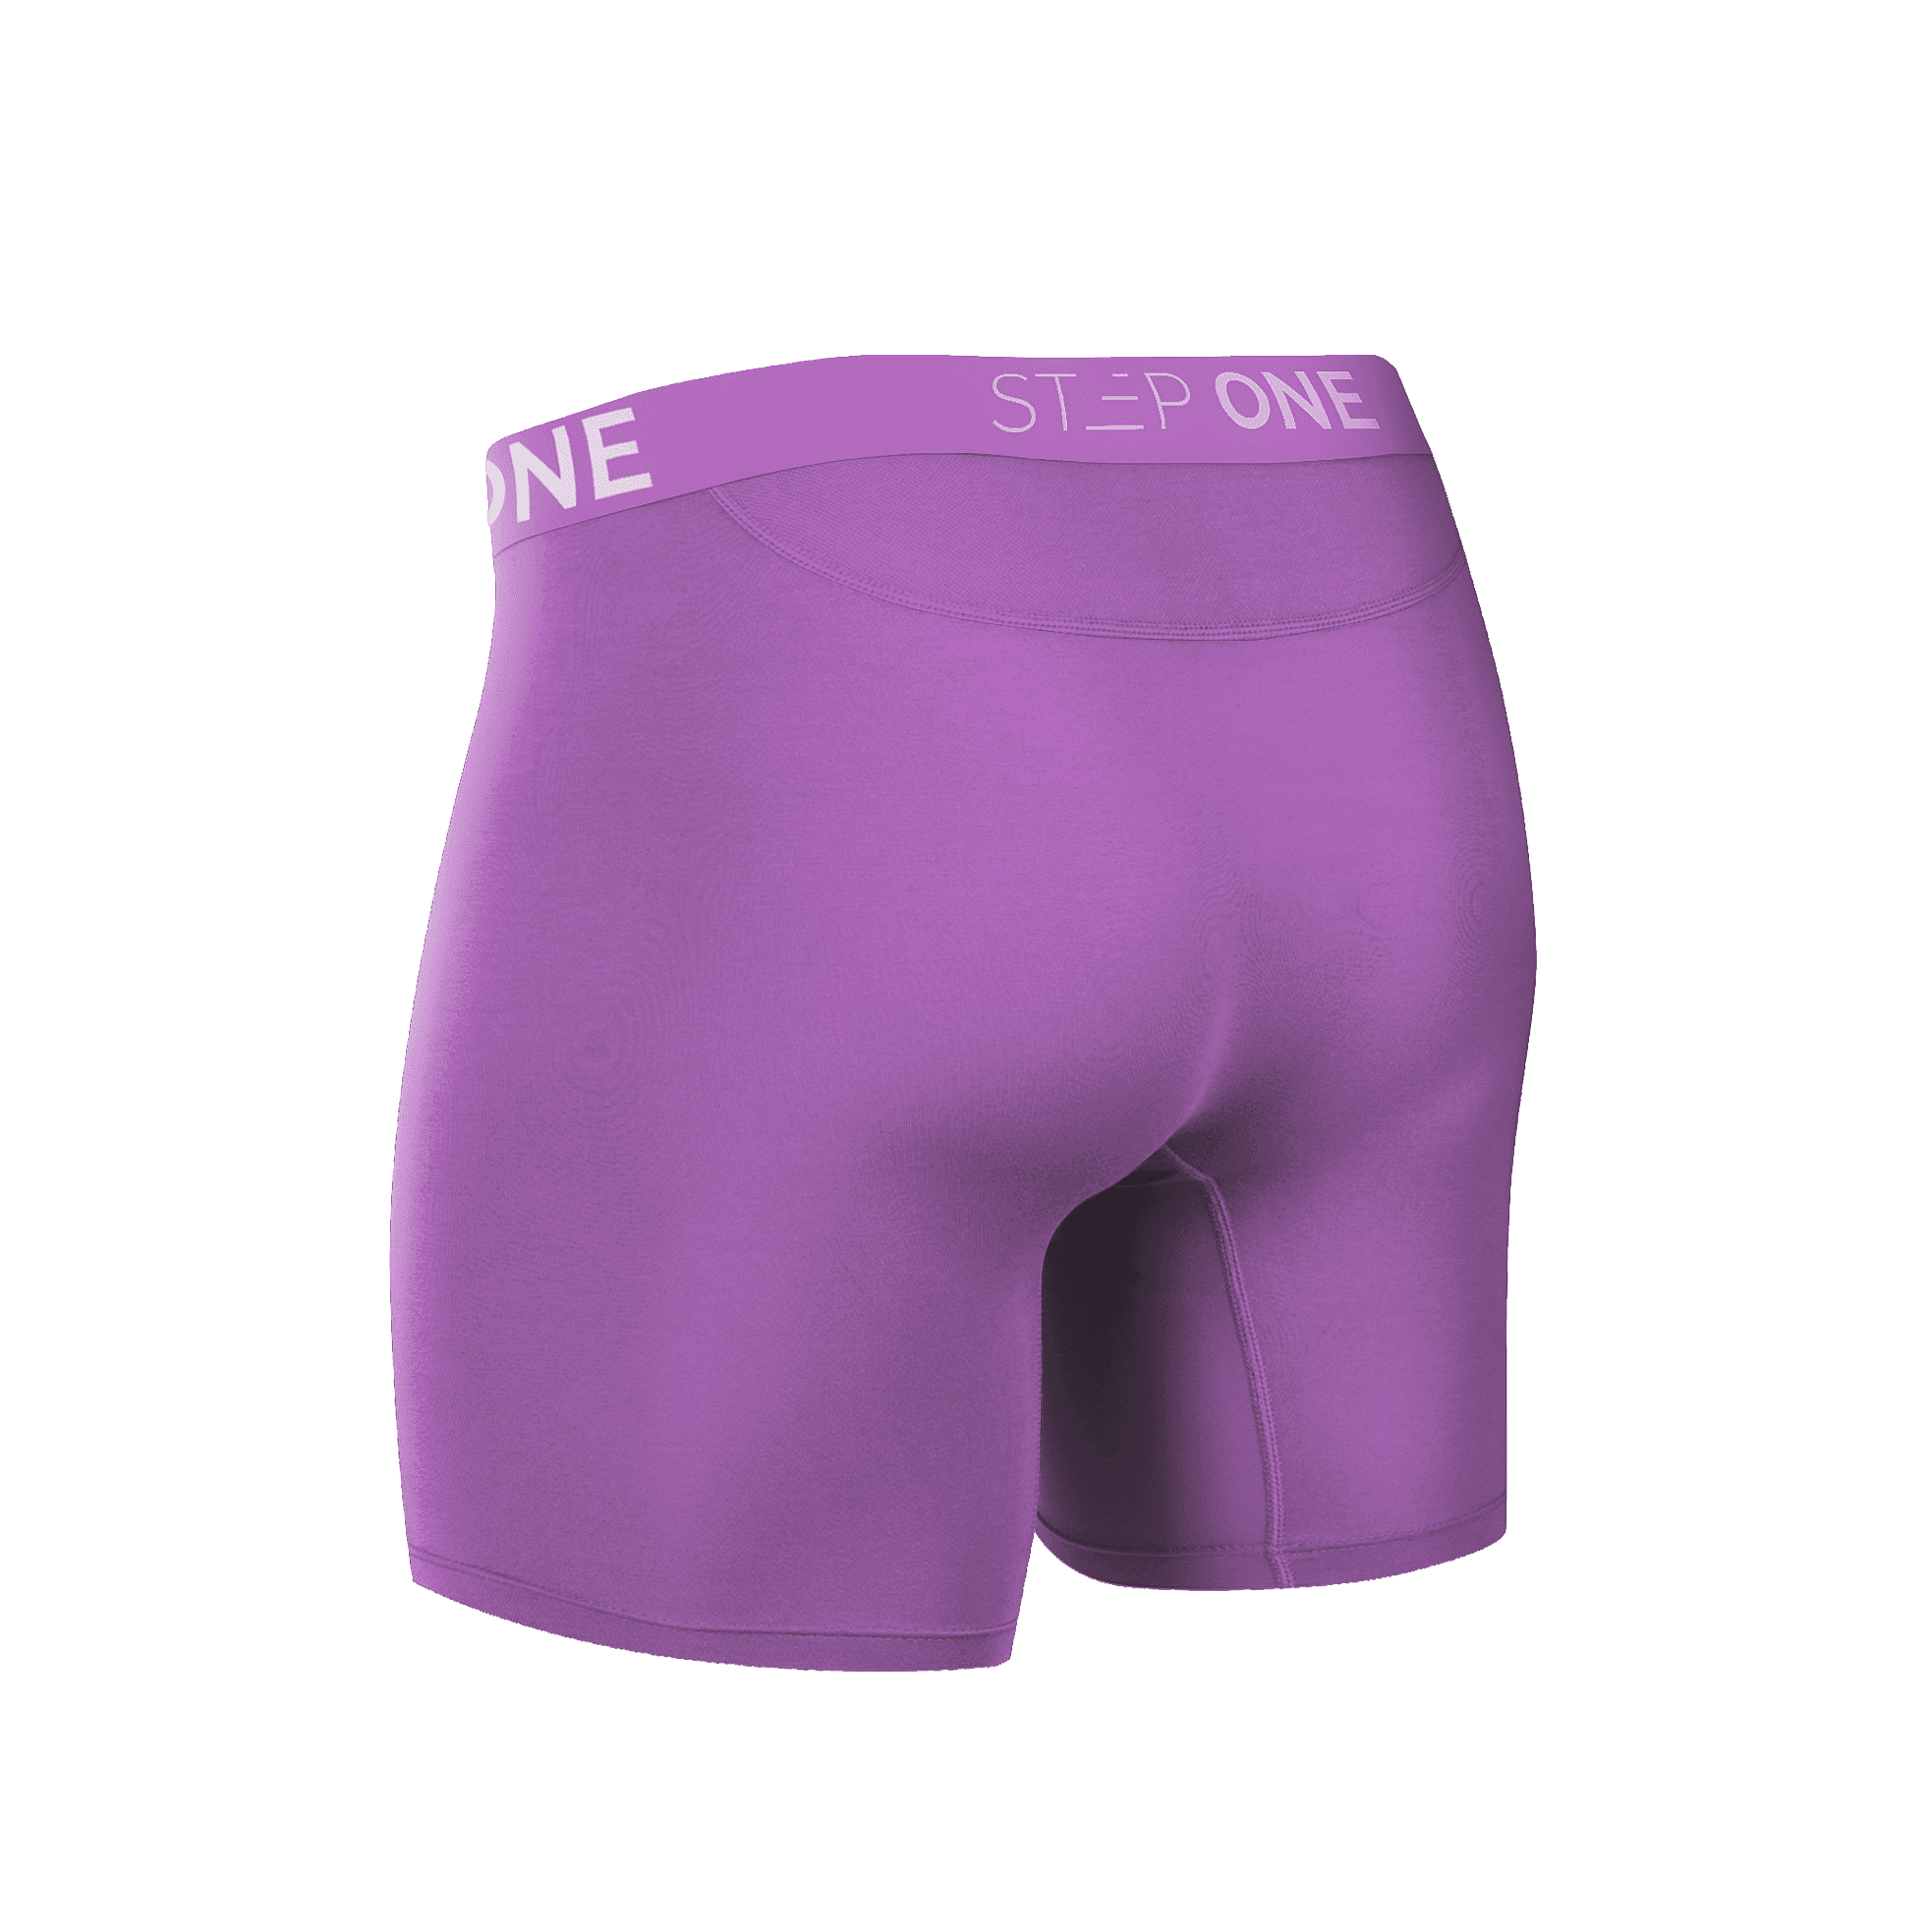 Boxer Brief Fly - Willy Bonkas - View 2